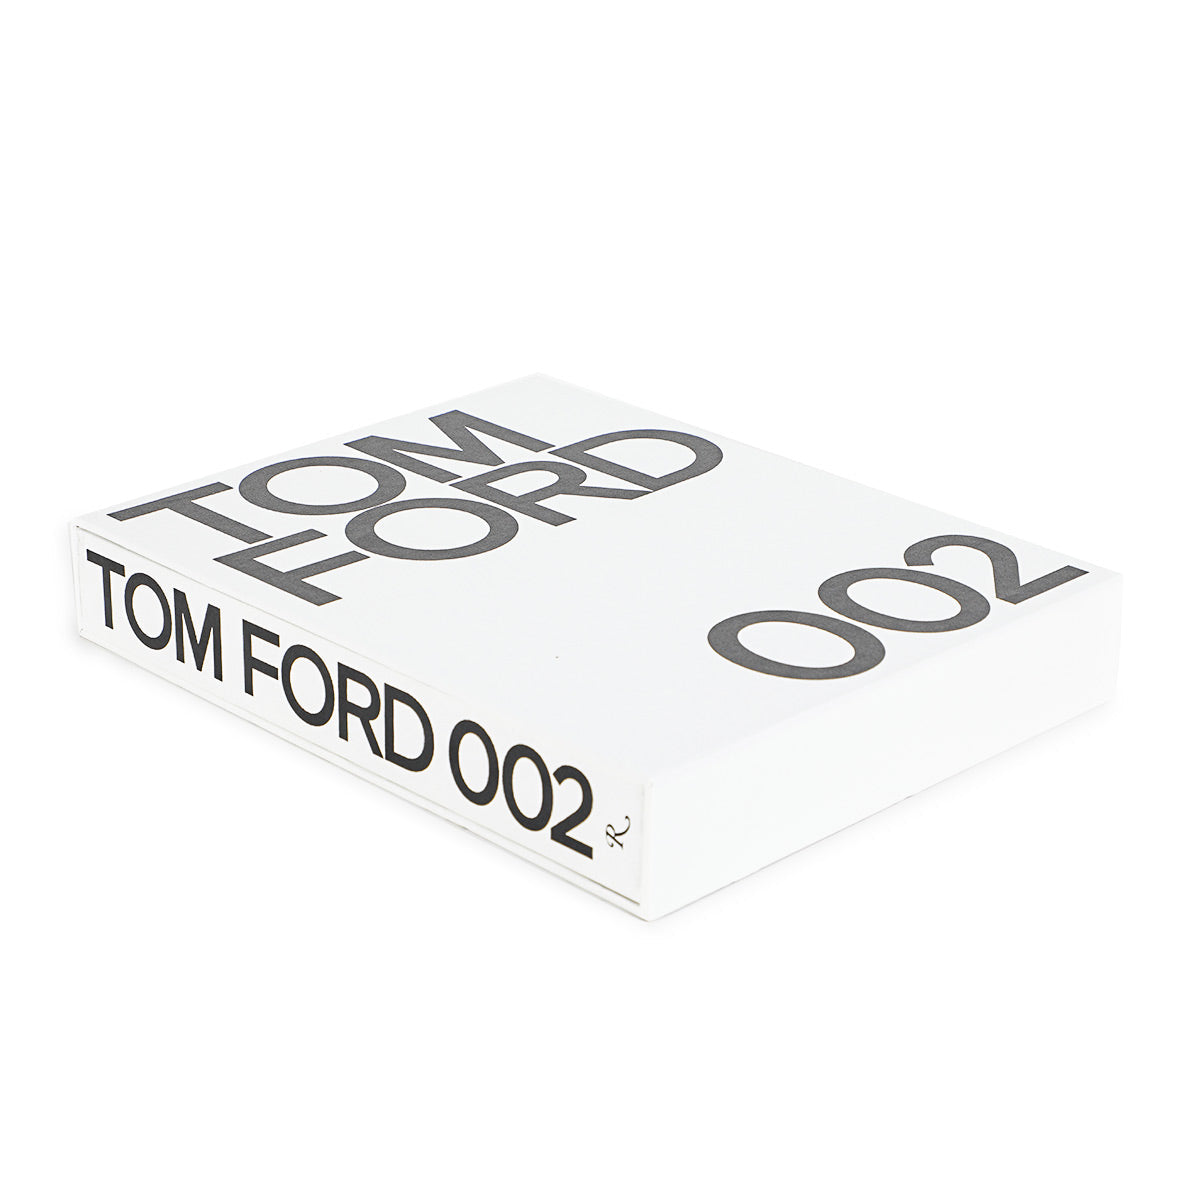 TOM FORD 002 Book